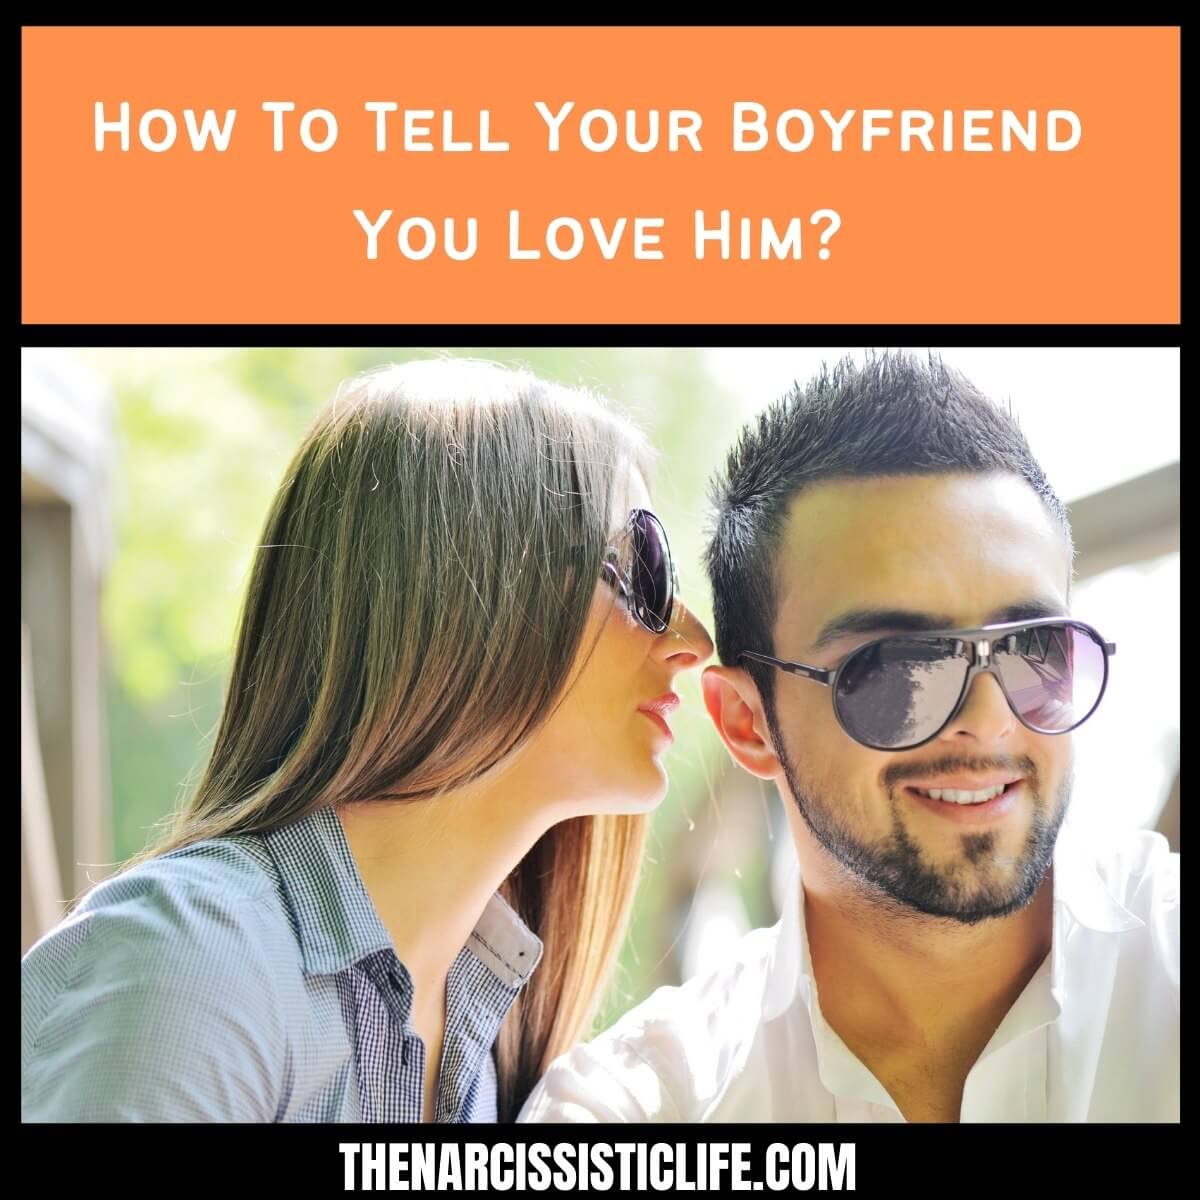 How To Tell Your Boyfriend You Love Him